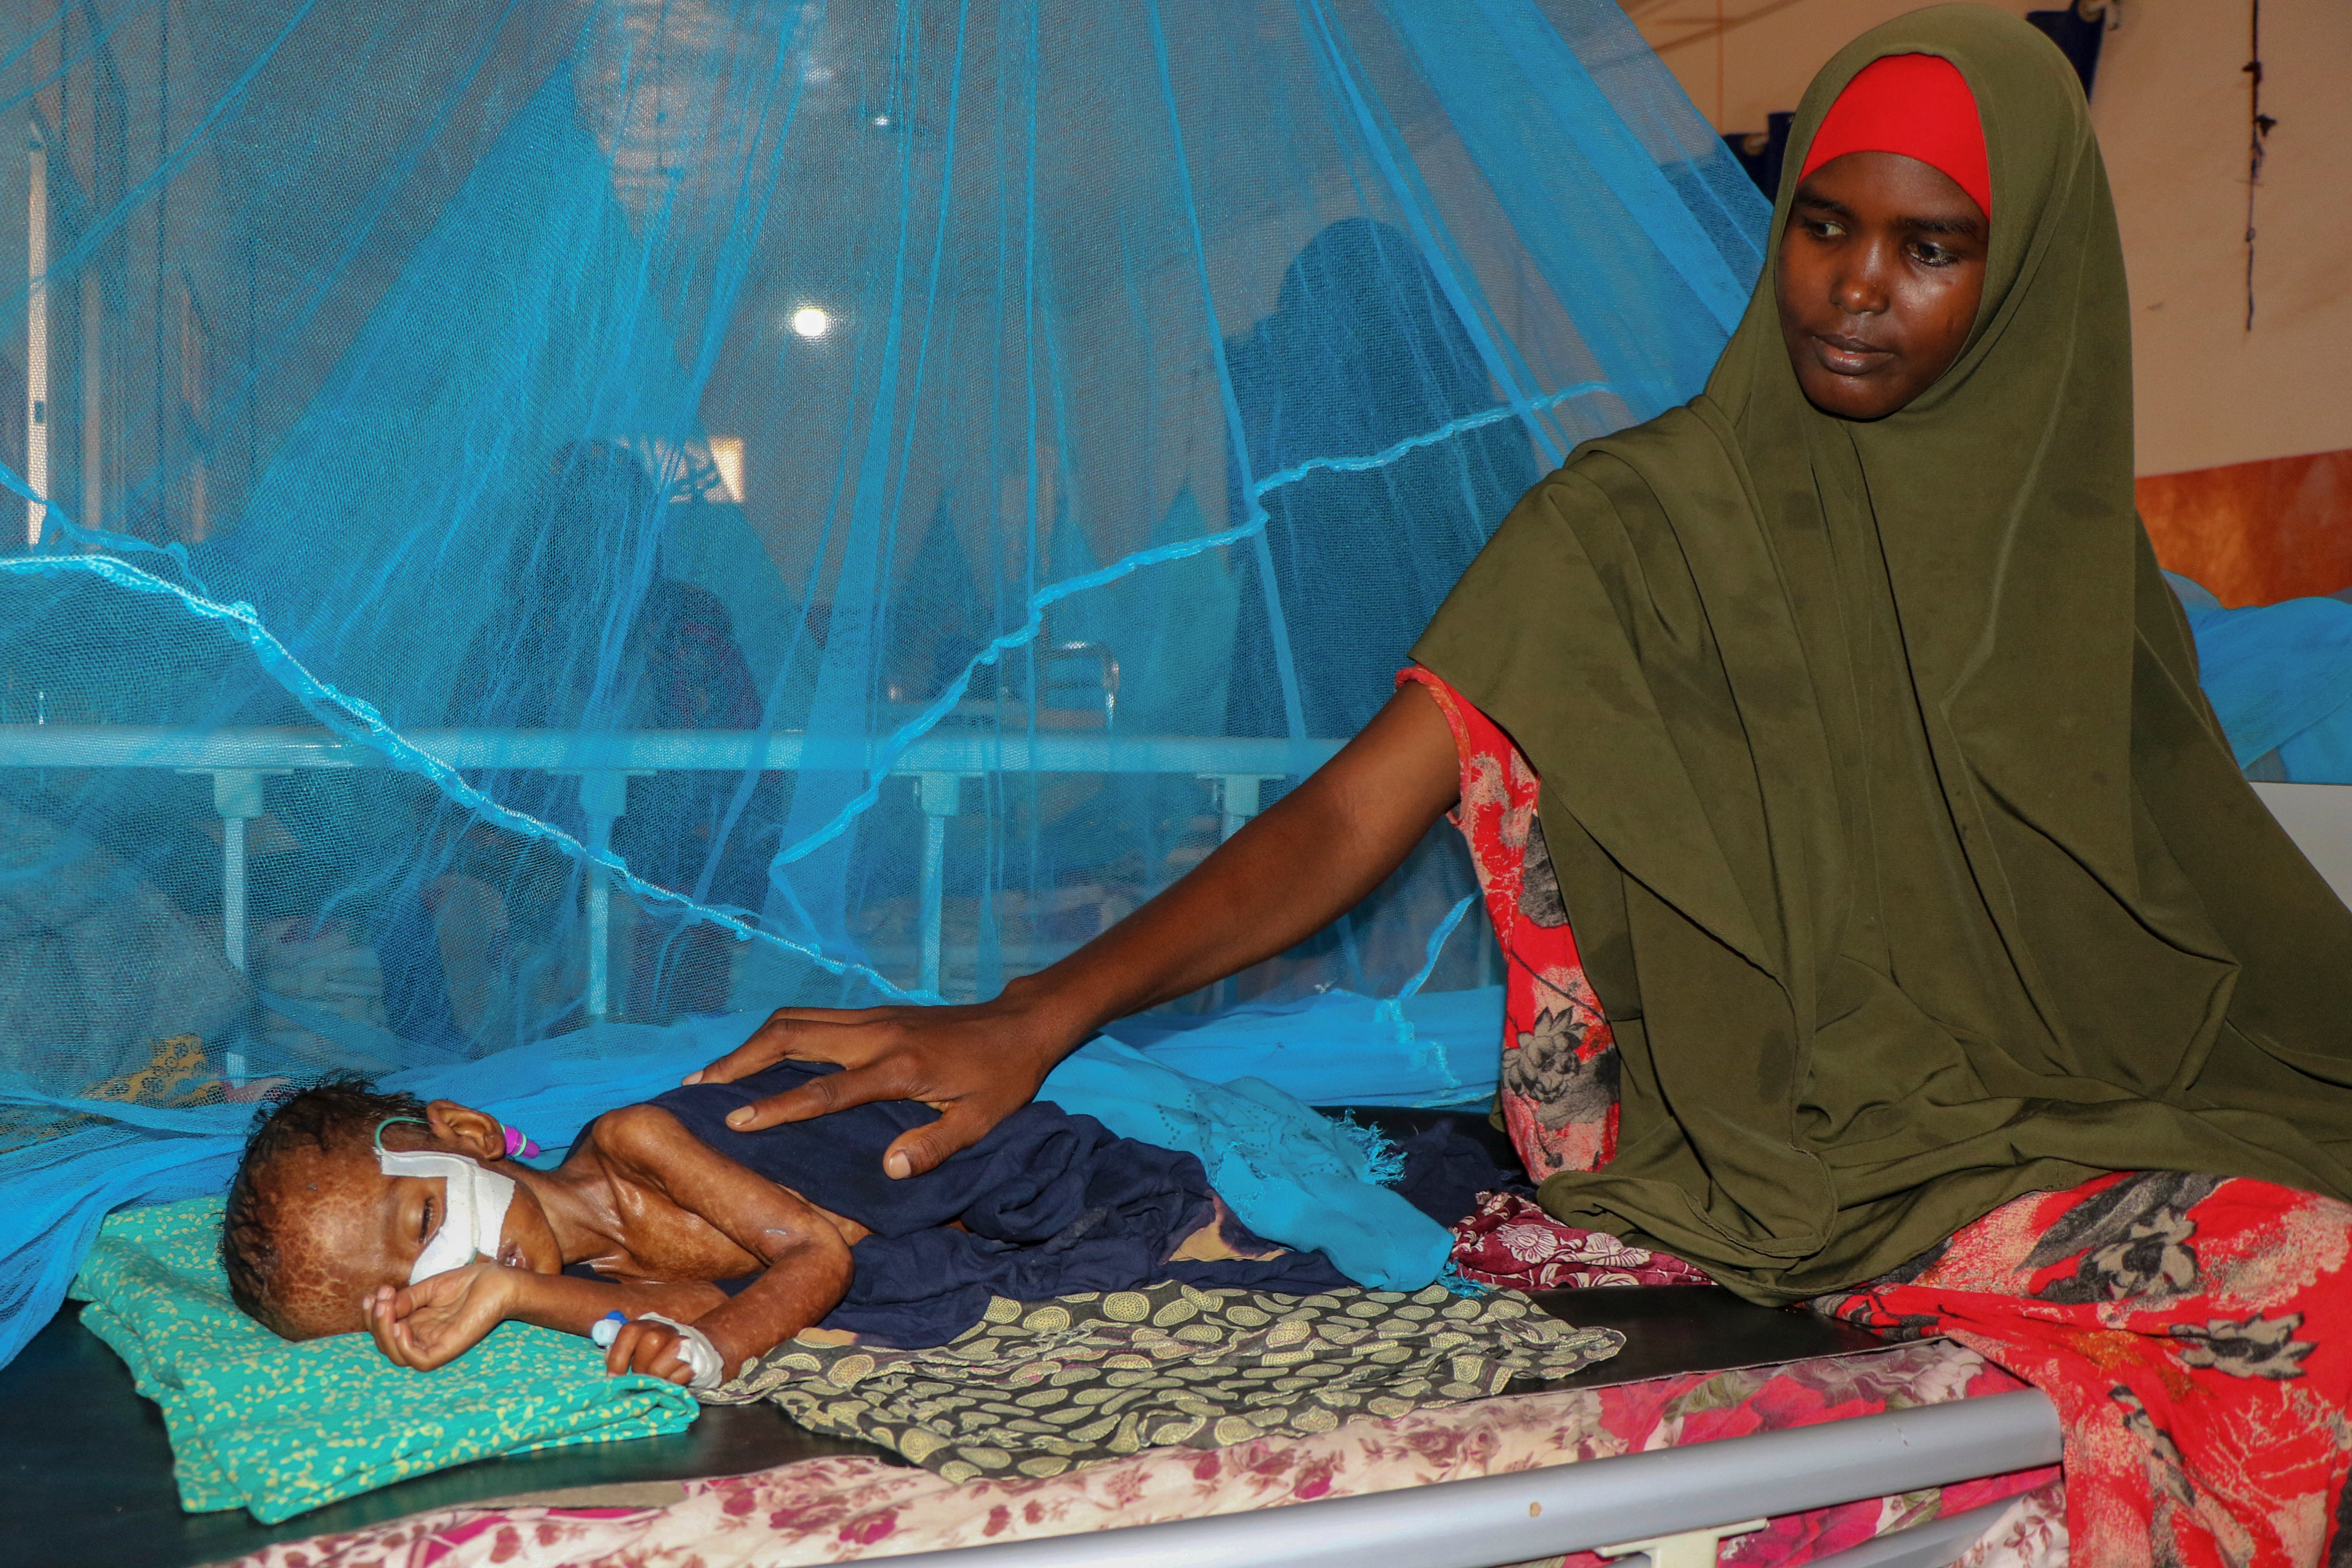 Dhahira Hassan Ali sits with her one-year-old son Adan as he is fed via a nasogastric feeding tube to treat his severe acute malnutrition, at the stabilization center of Bay Regional Hospital in Baidoa, Somalia